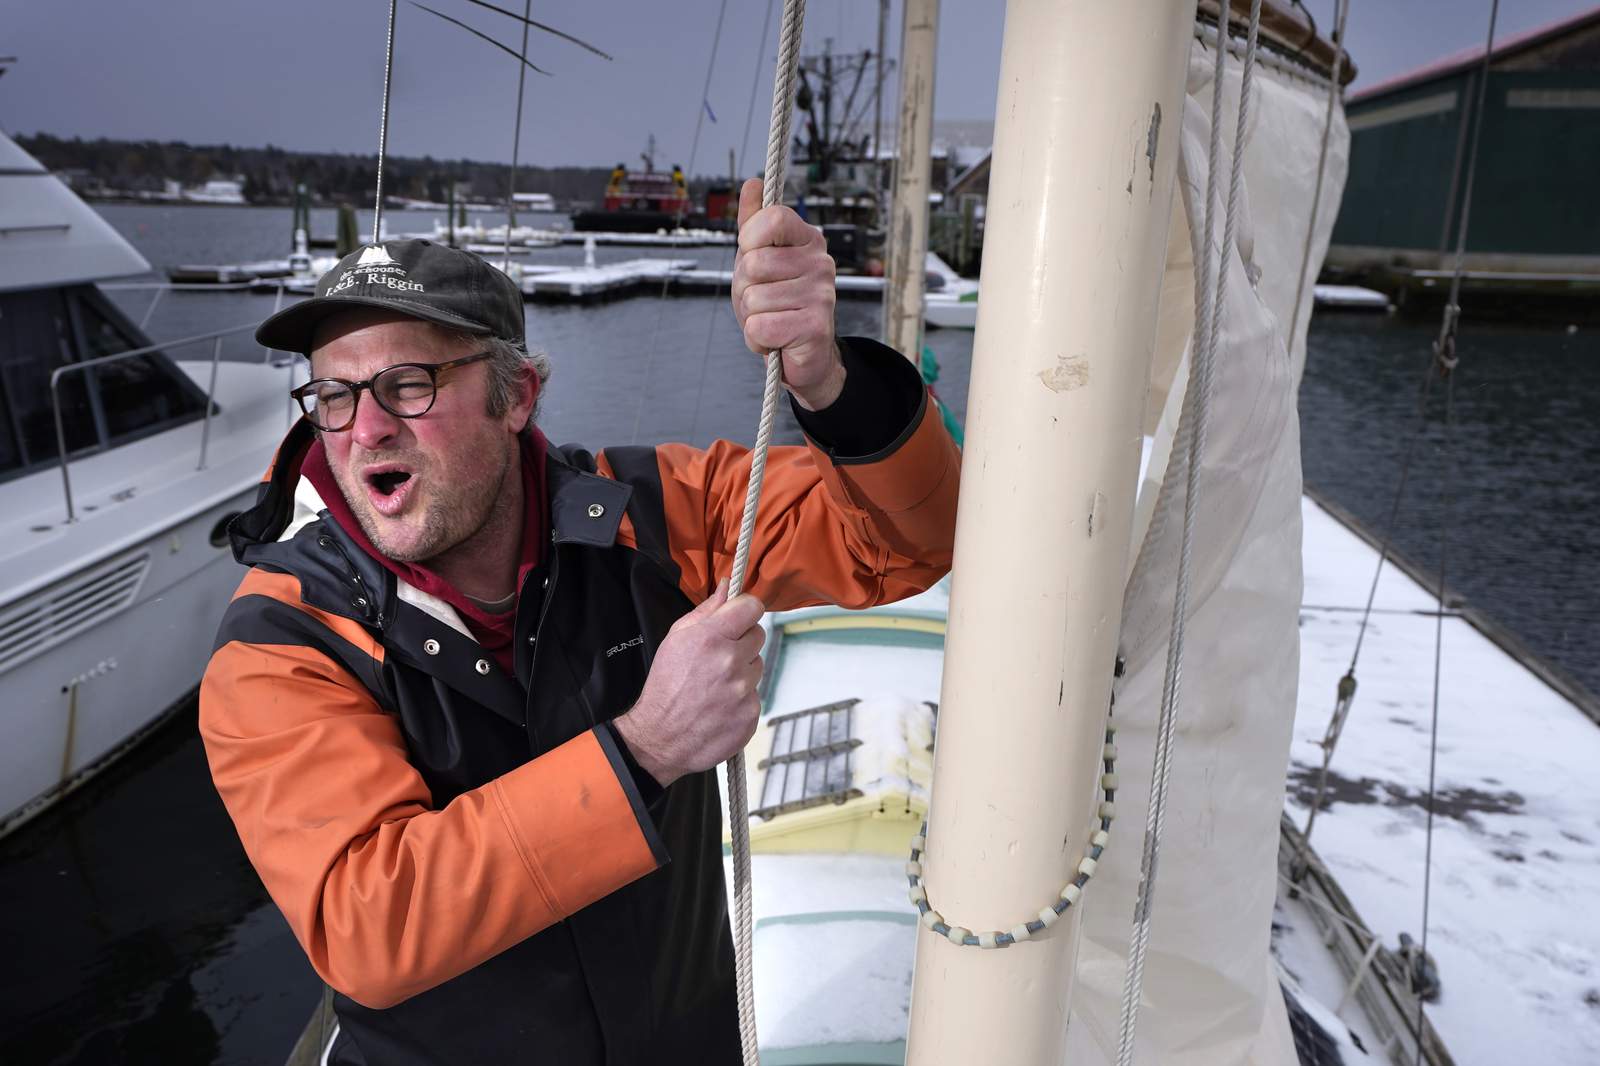 Sea shanties are having a moment amid isolation of pandemic